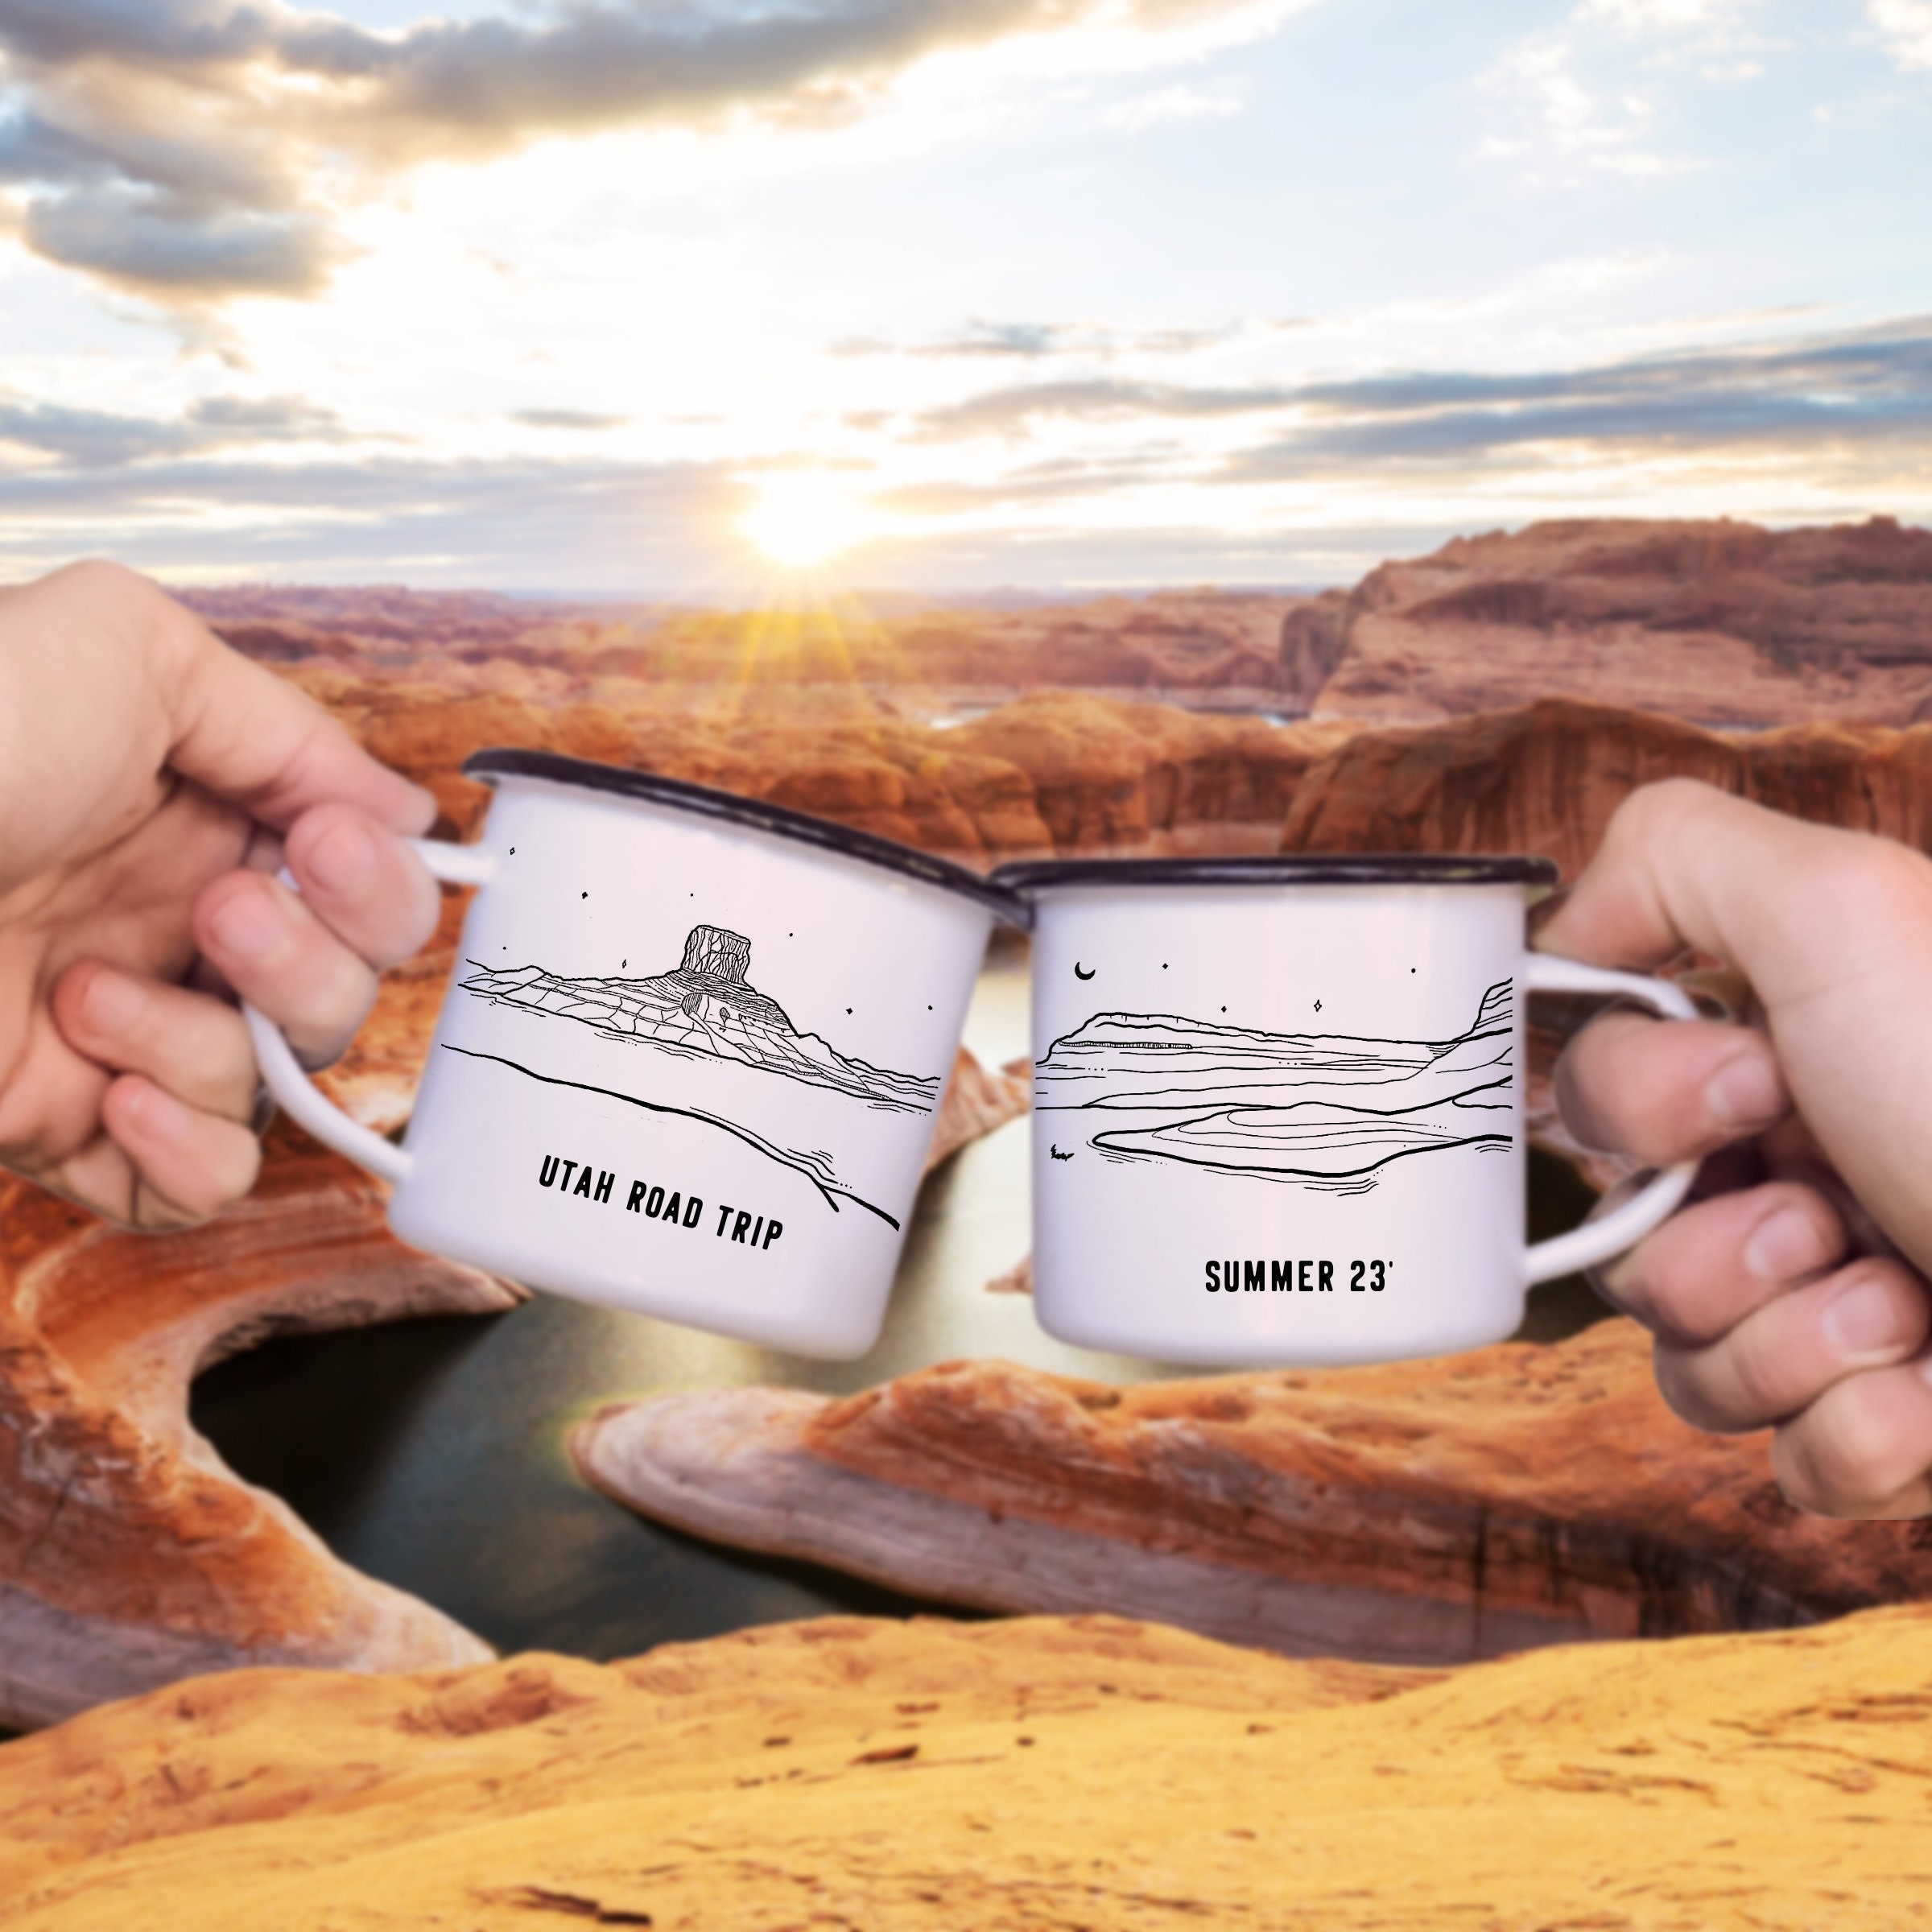 Camp Mug Personalized, Camping Mountain Camp Mug 11oz Camper Van Lake Decor  Coffee Cup - unique Custom name engagement gift for couple, 1x